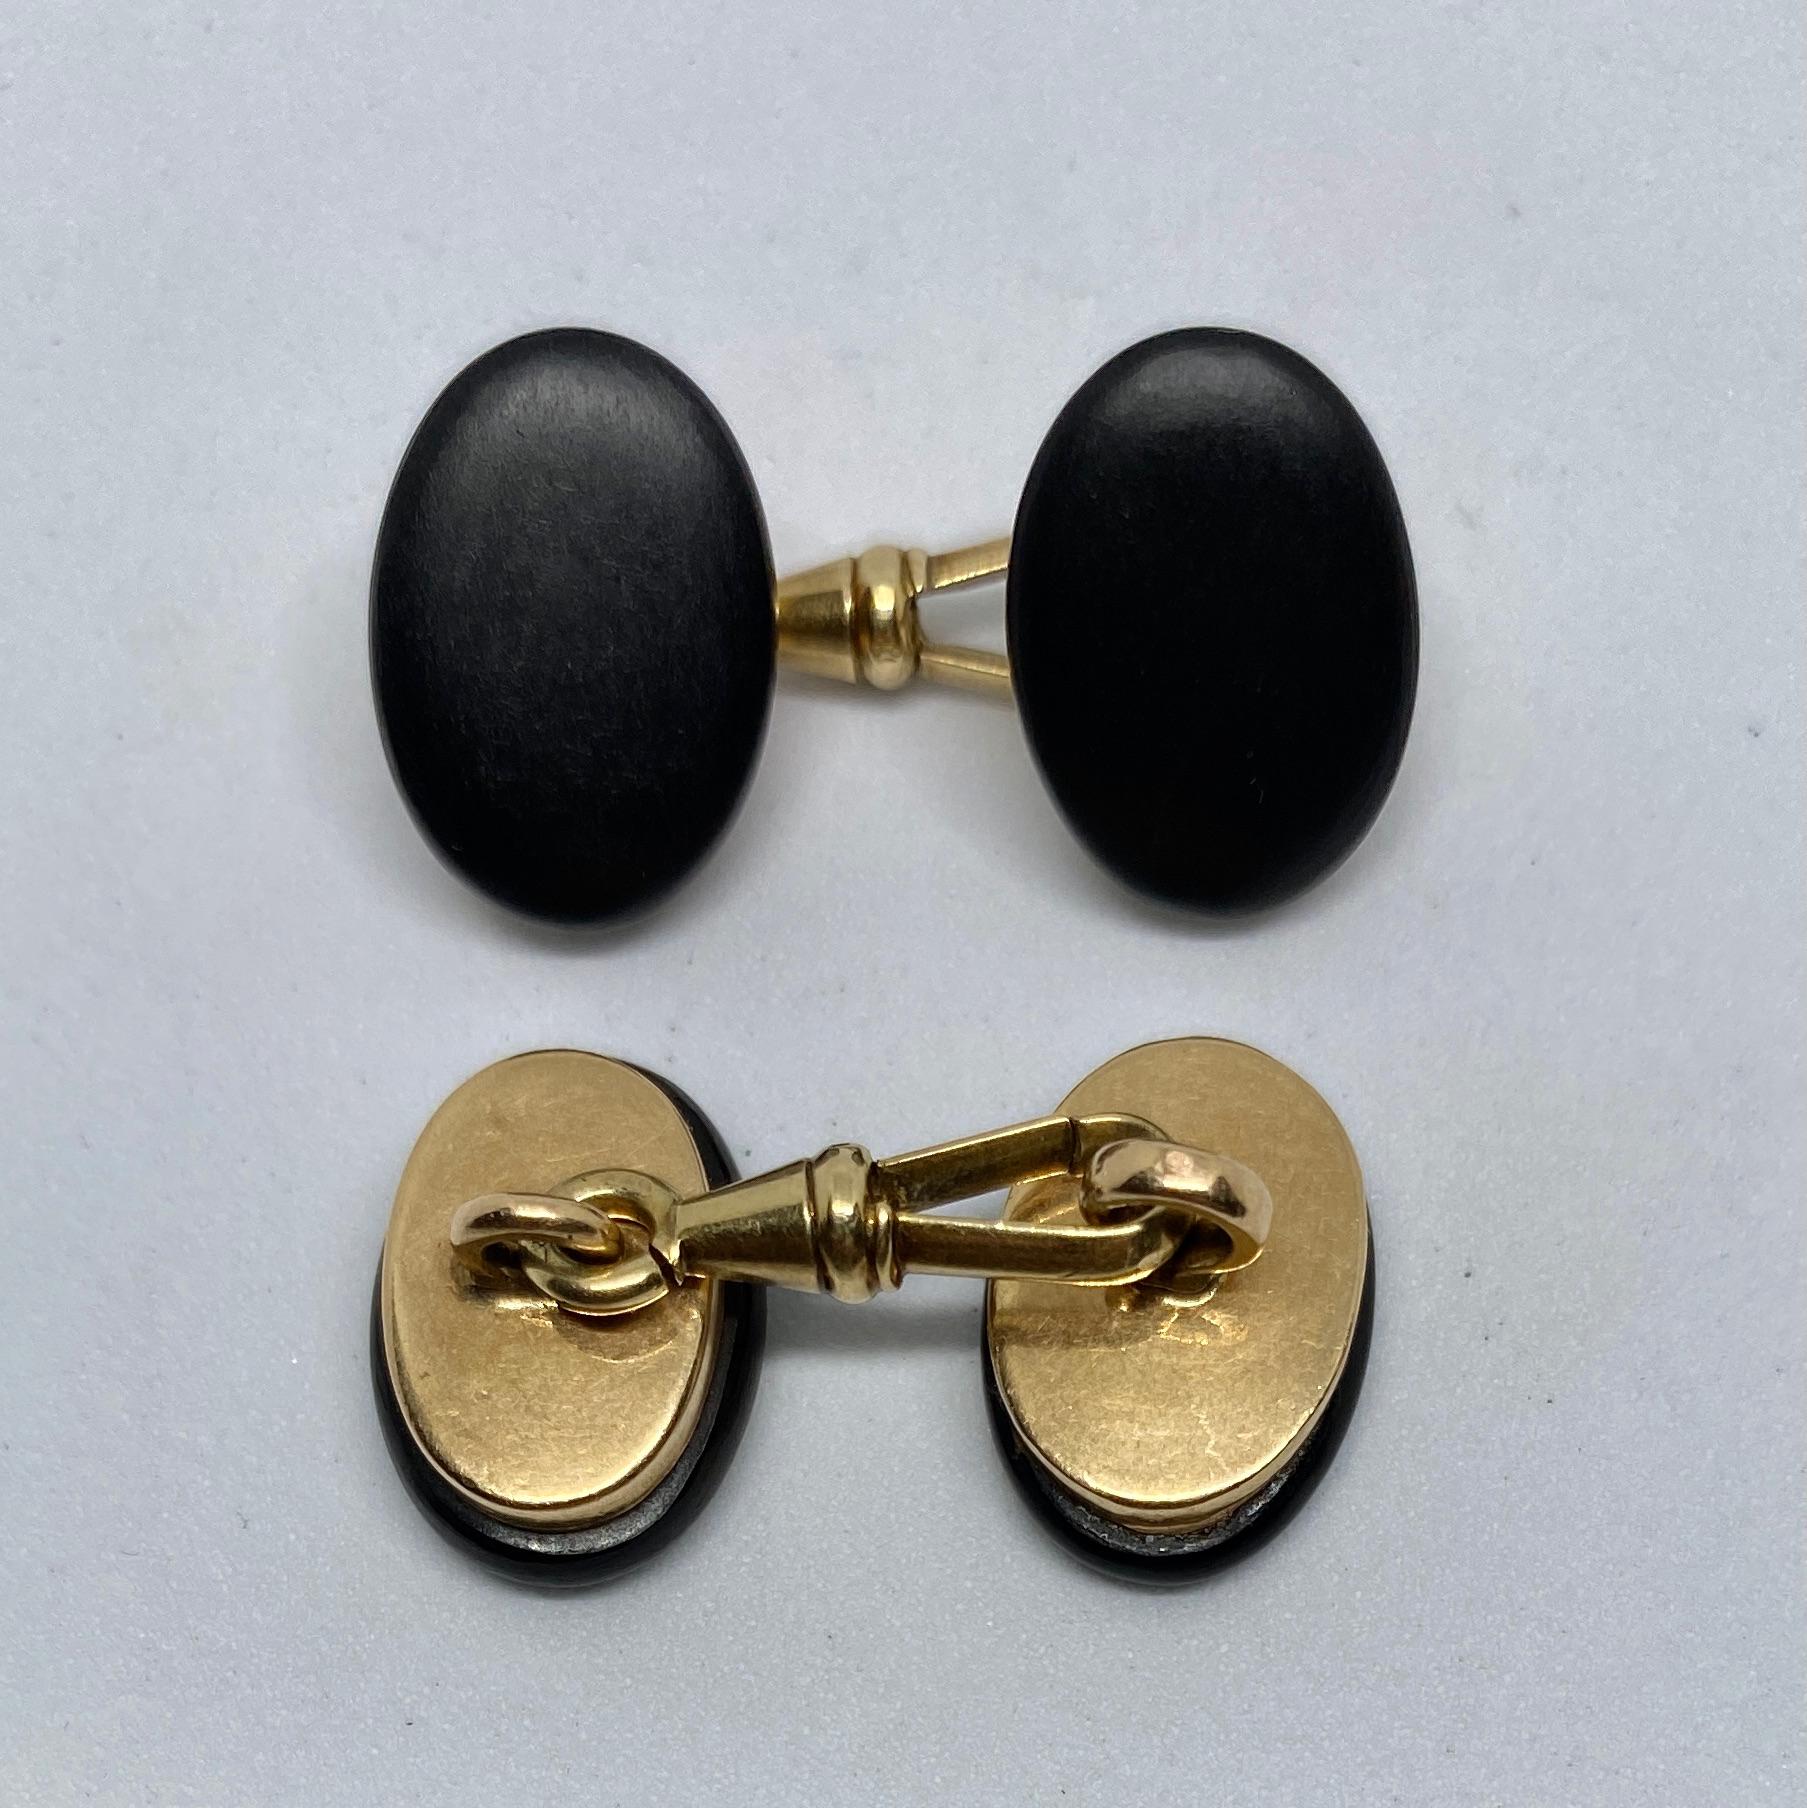 A superb pair of double-sided cufflinks handmade in Austria in the early 20th Century. 

The cufflinks are rendered in solid 14K yellow gold and feature four oval discs in rich, black ebony. Each pair is joined by a spring loop connector, also in